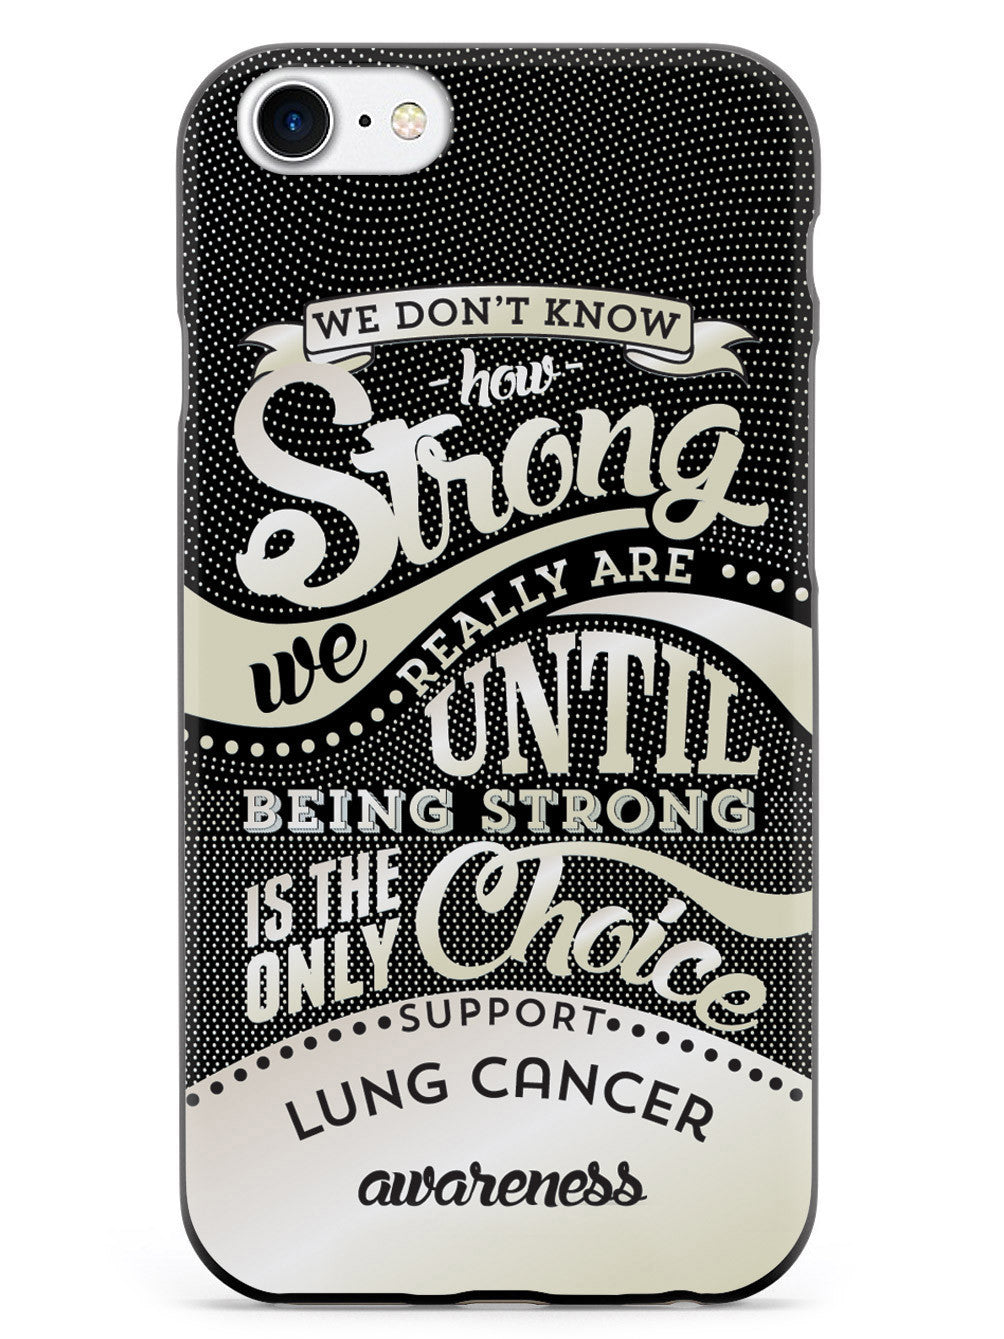 How Strong - Lung Cancer Awareness Case